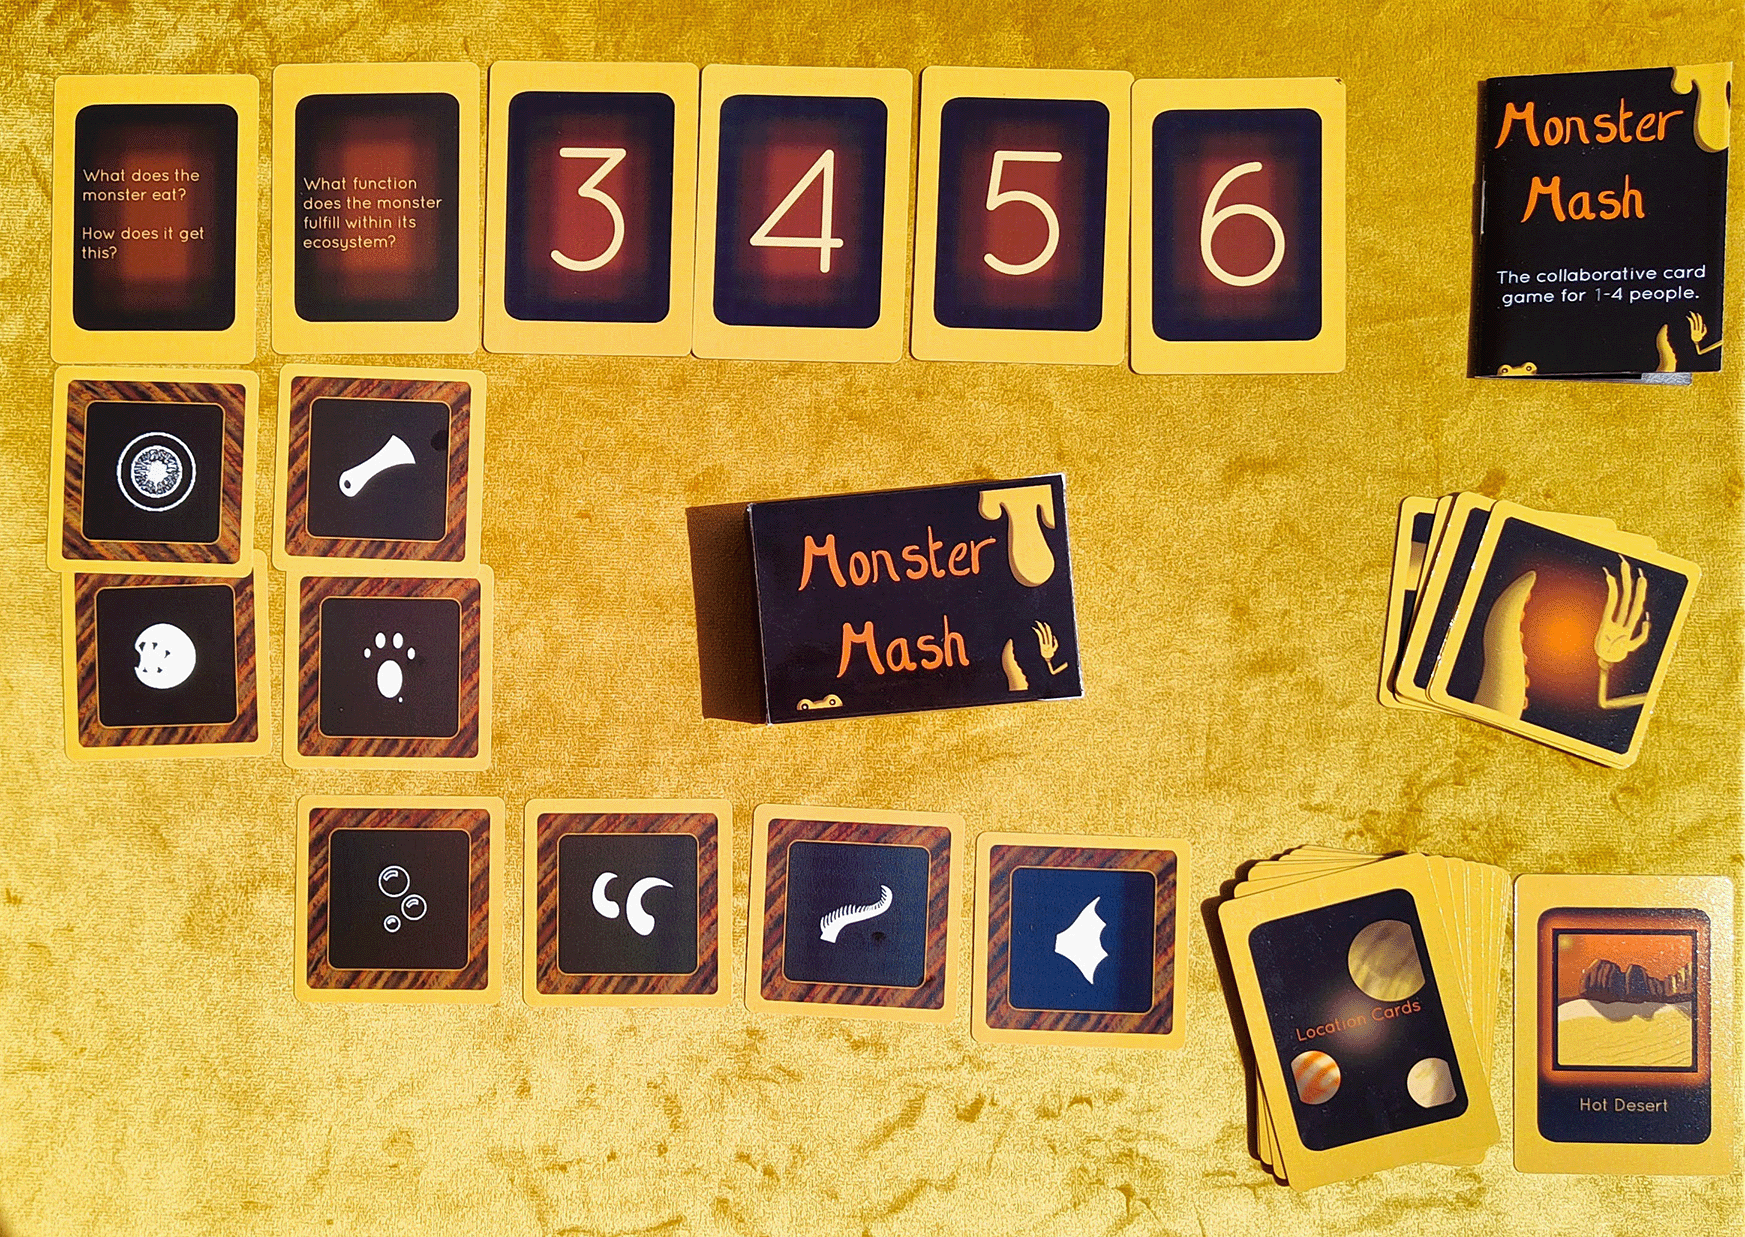 A card game featuring images of spaces, abstract representations of body parts, and a series of environmentally focused questions.